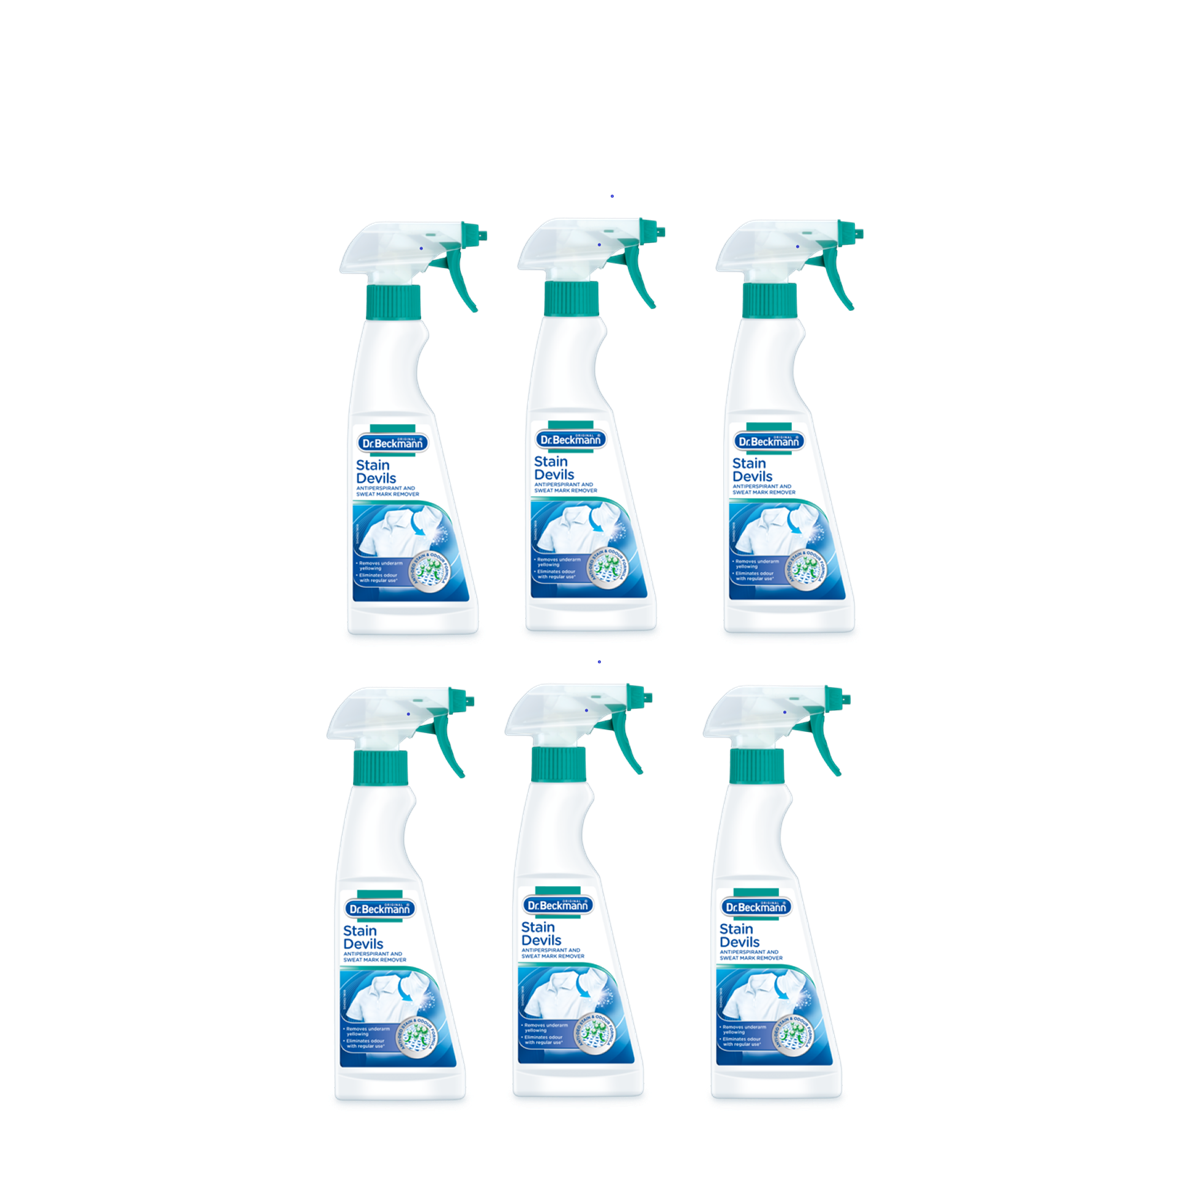 Case of 6 x Dr Beckmann Stain Devil Anti-Perspirant and Sweat Stain Remover Spray 250ml